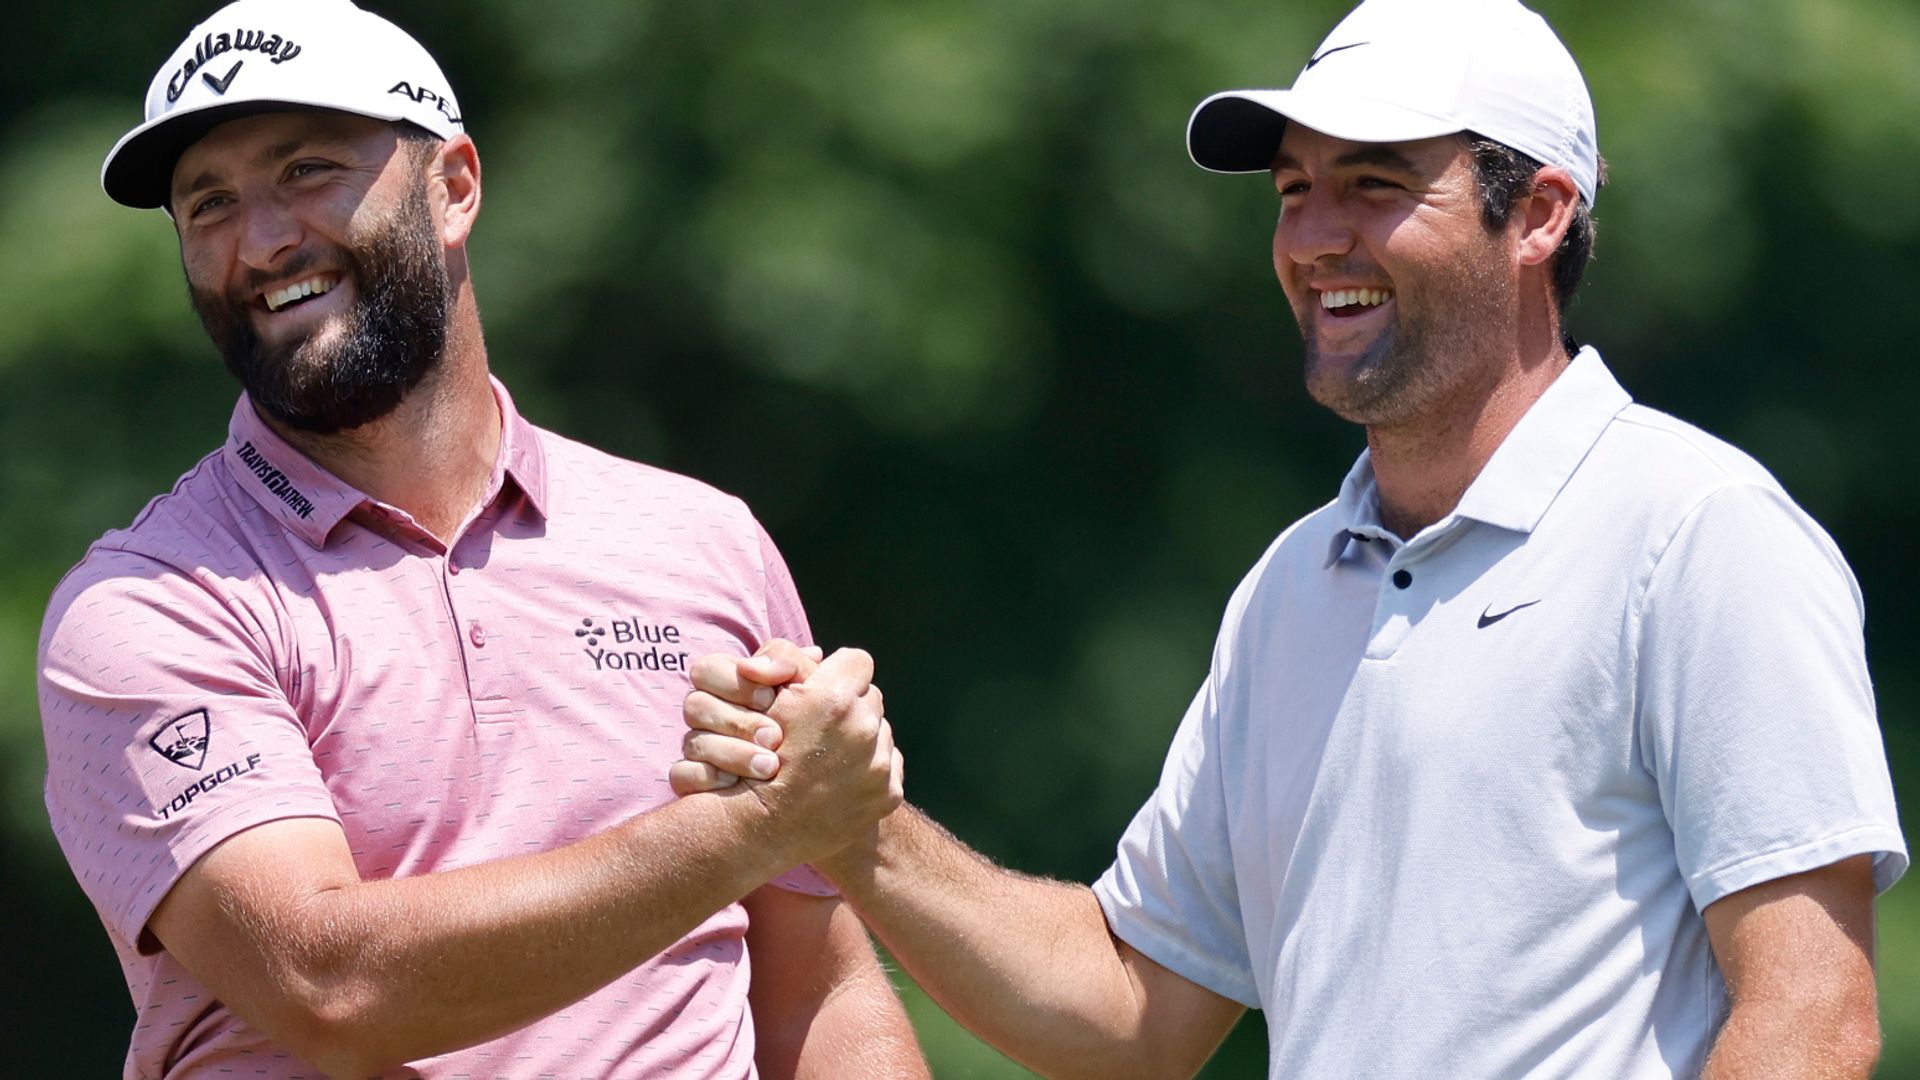 Scheffler and Rahm: What to expect from dominant duo at US Open